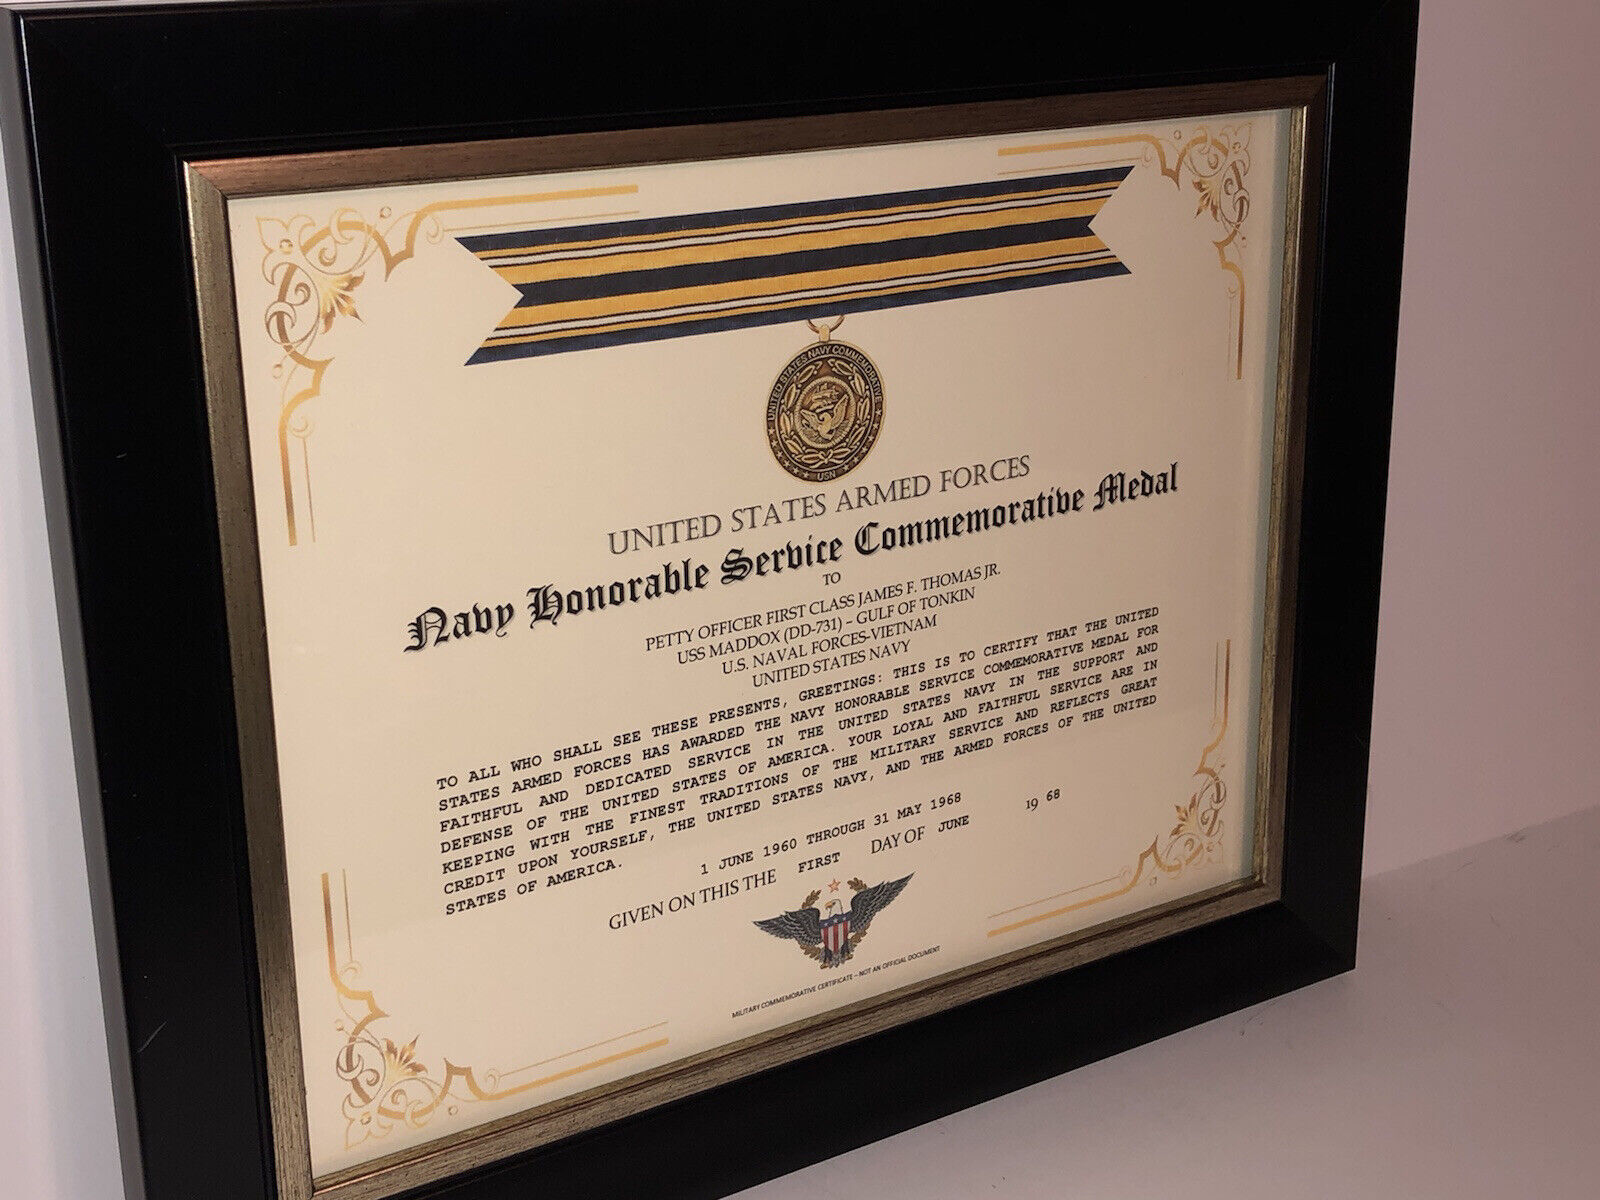 U.S. NAVY HONORABLE SERVICE COMMEMORATIVE MEDAL CERTIFICATE ~ Type 1